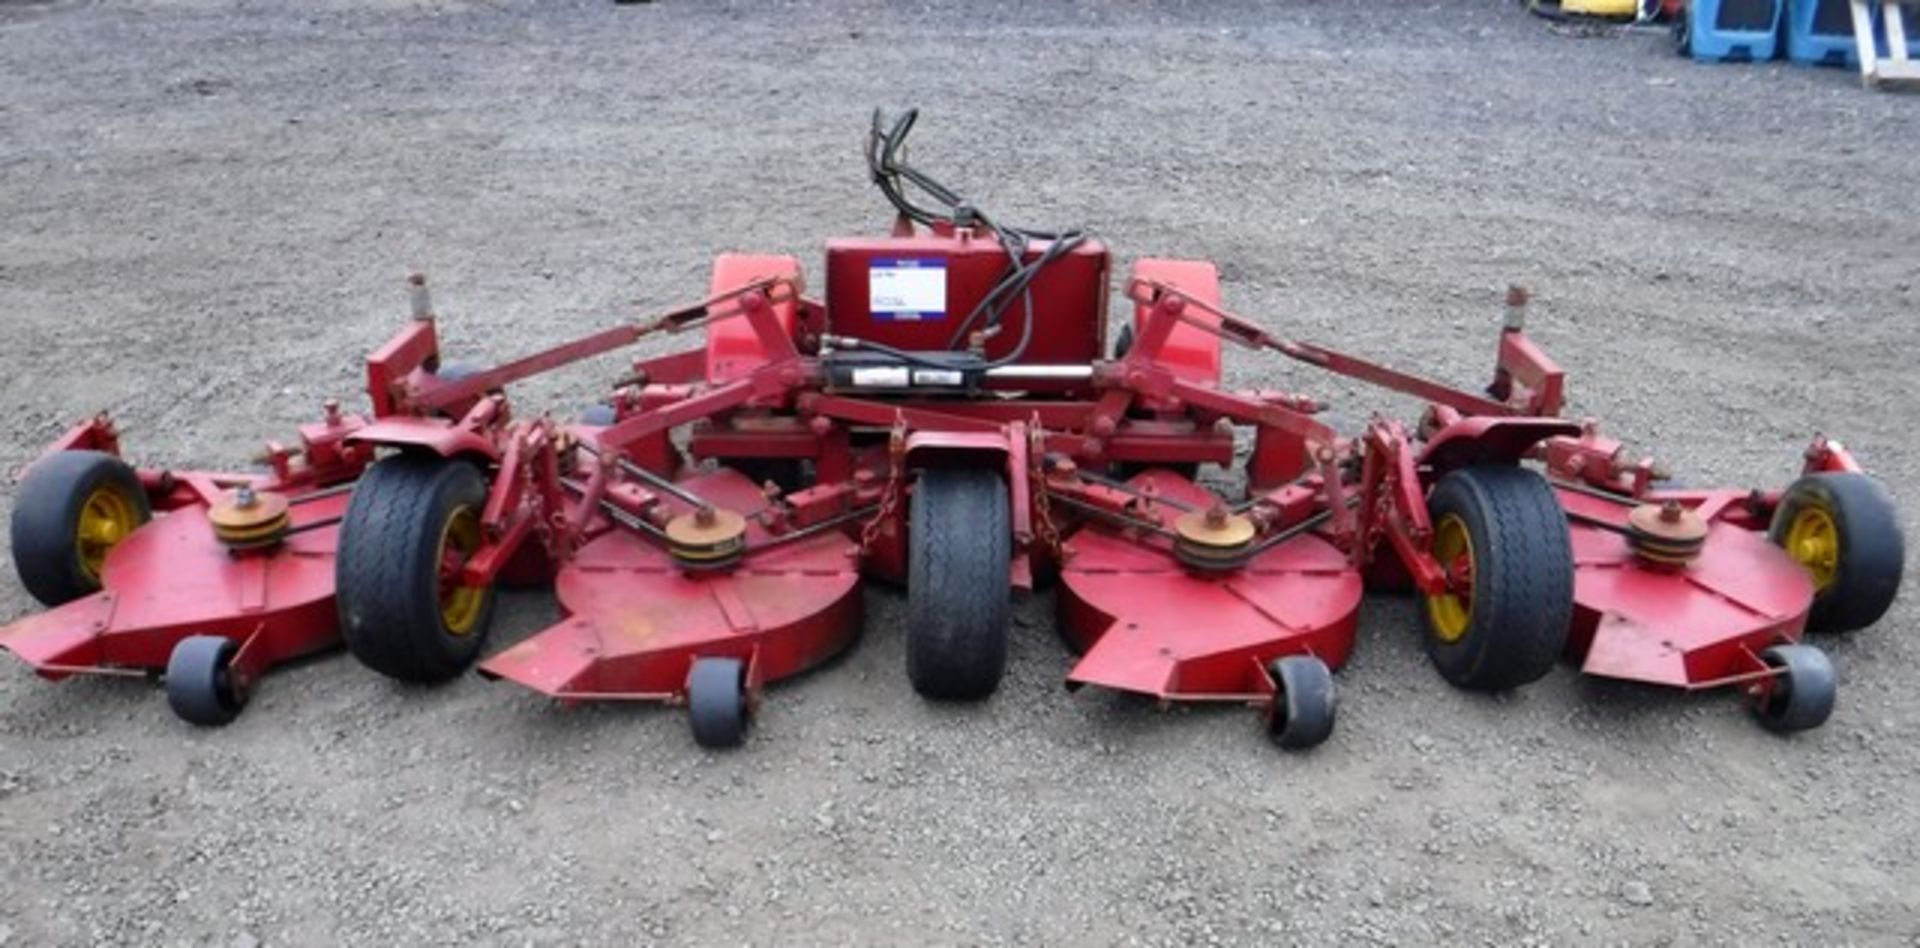 LASTEC ARTICULATOR, 7 DECKED PTO DRIVEN GRASS CUTTER WITH HYDRAULIC LIFT